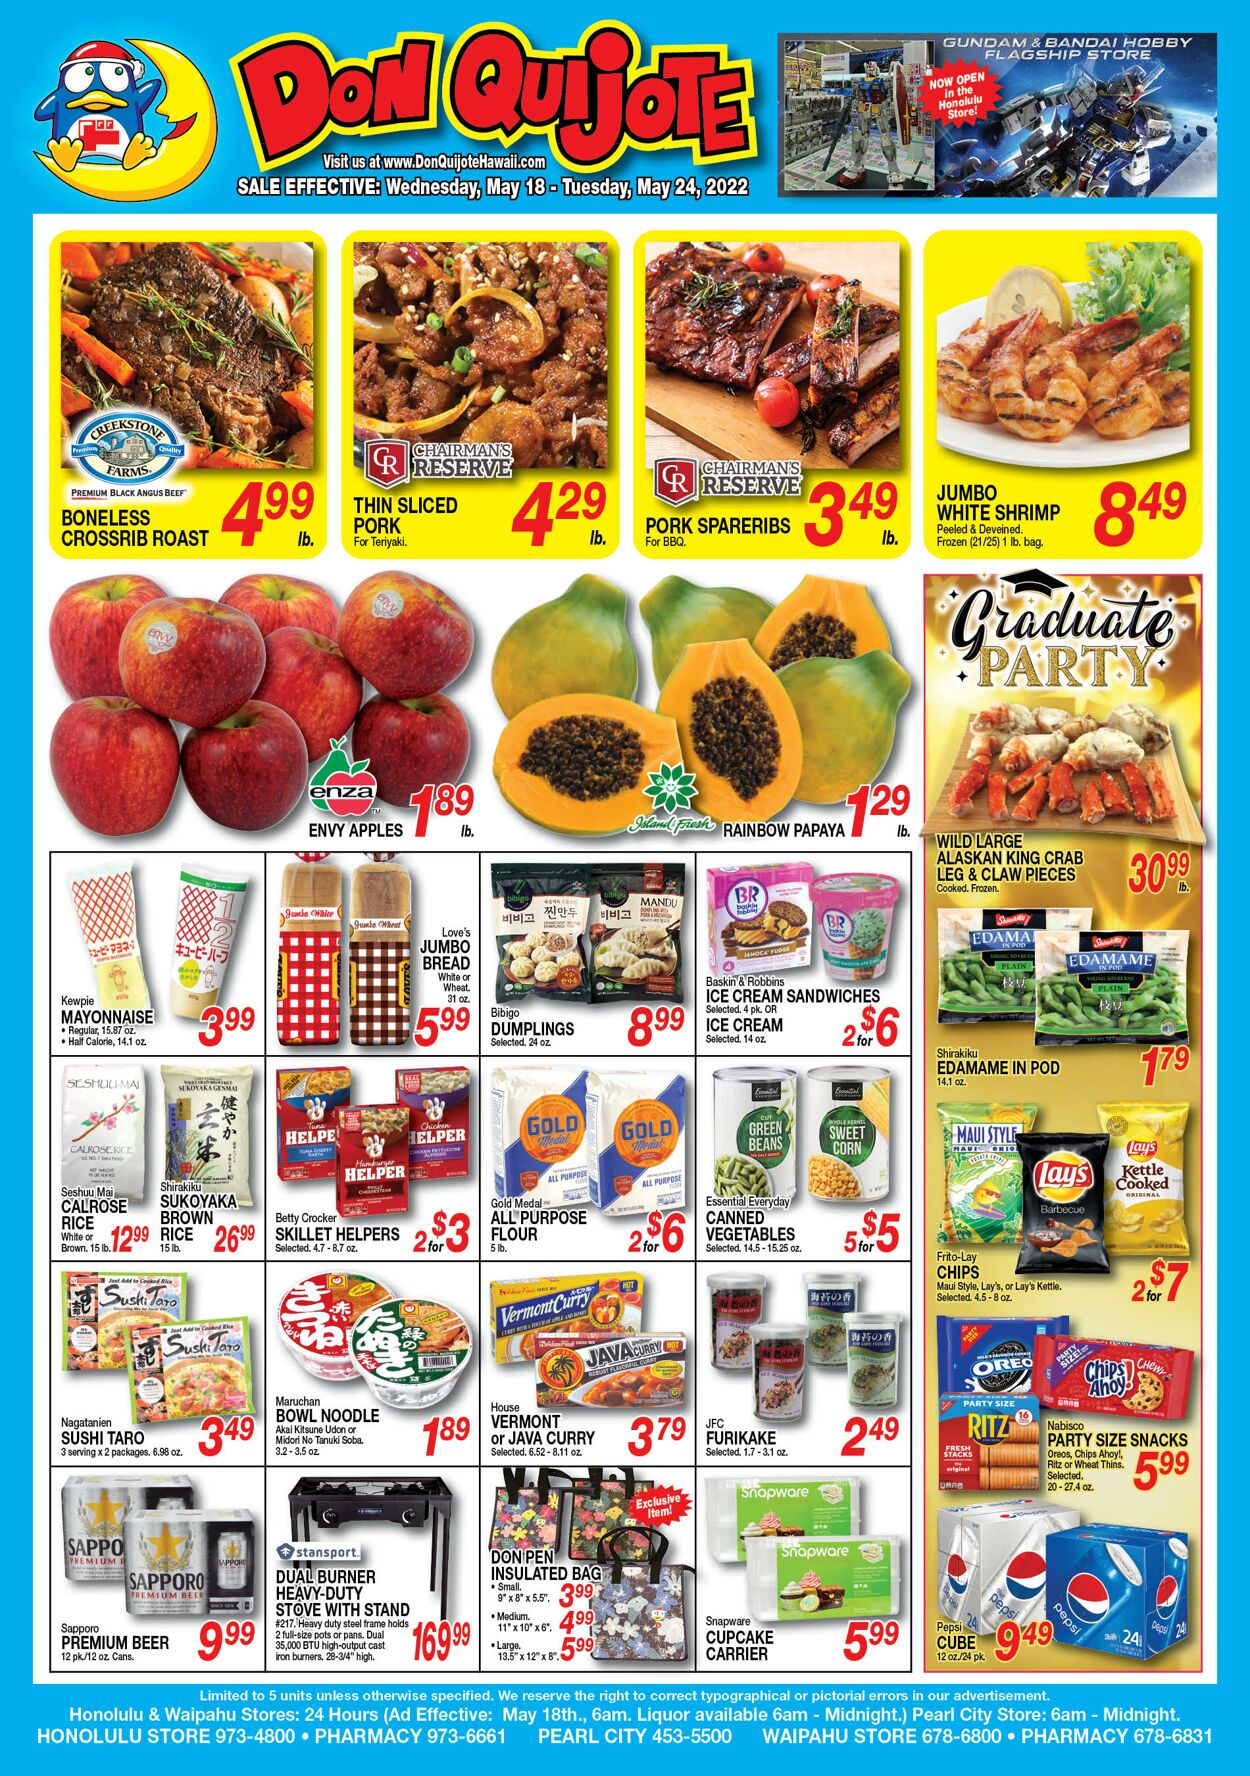 Don Quijote Hawaii Promotional weekly ads